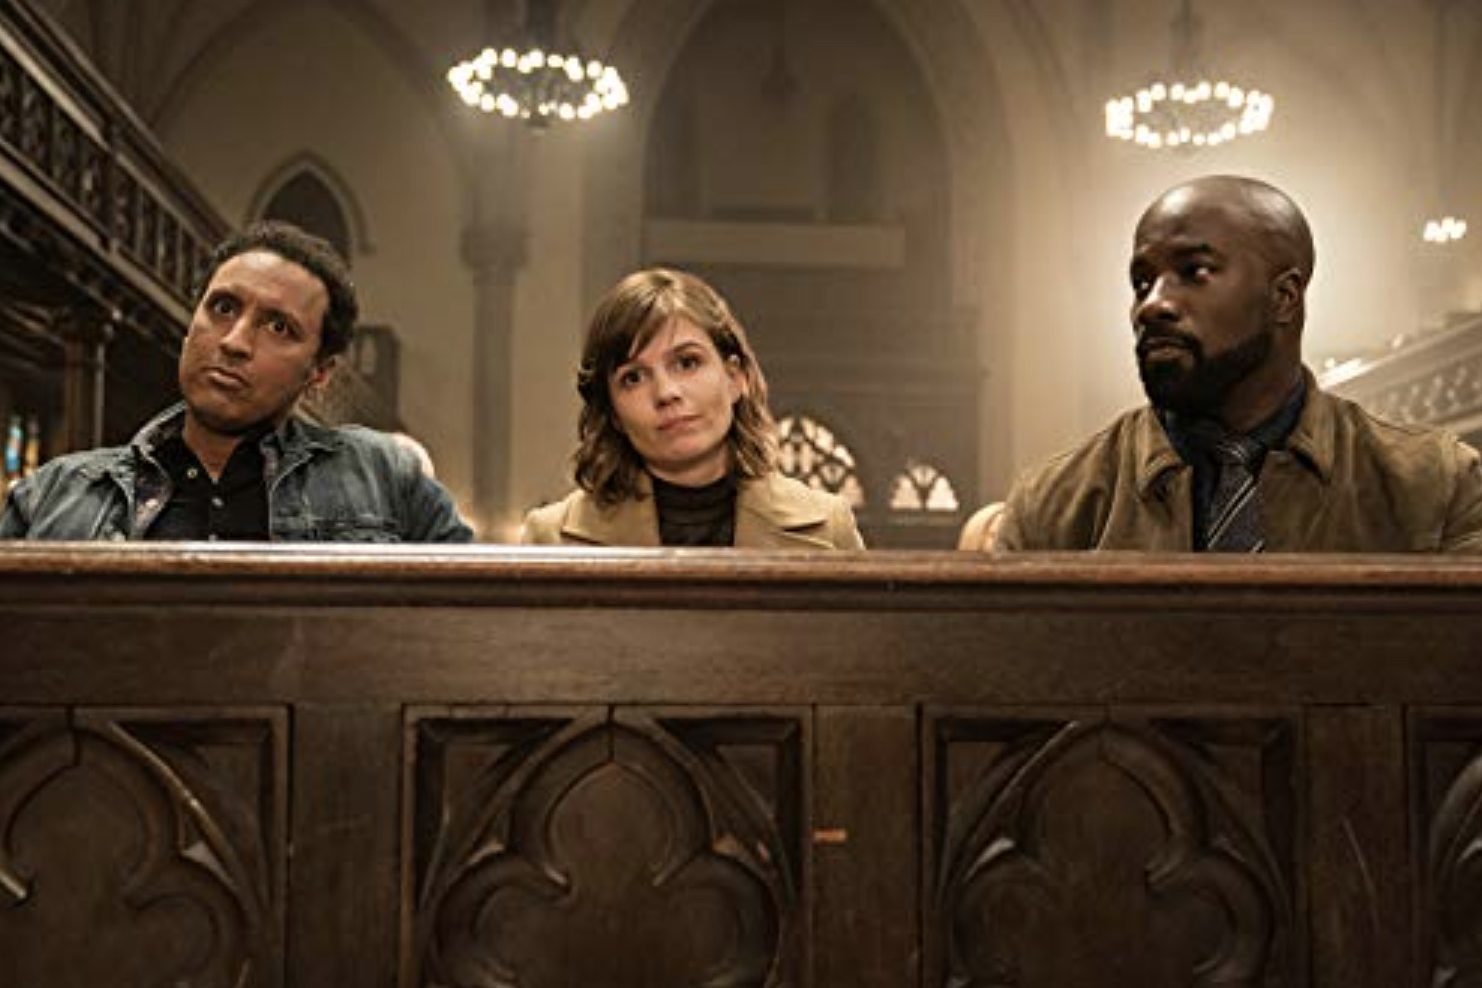 Two men and a woman sit in a Church pew.